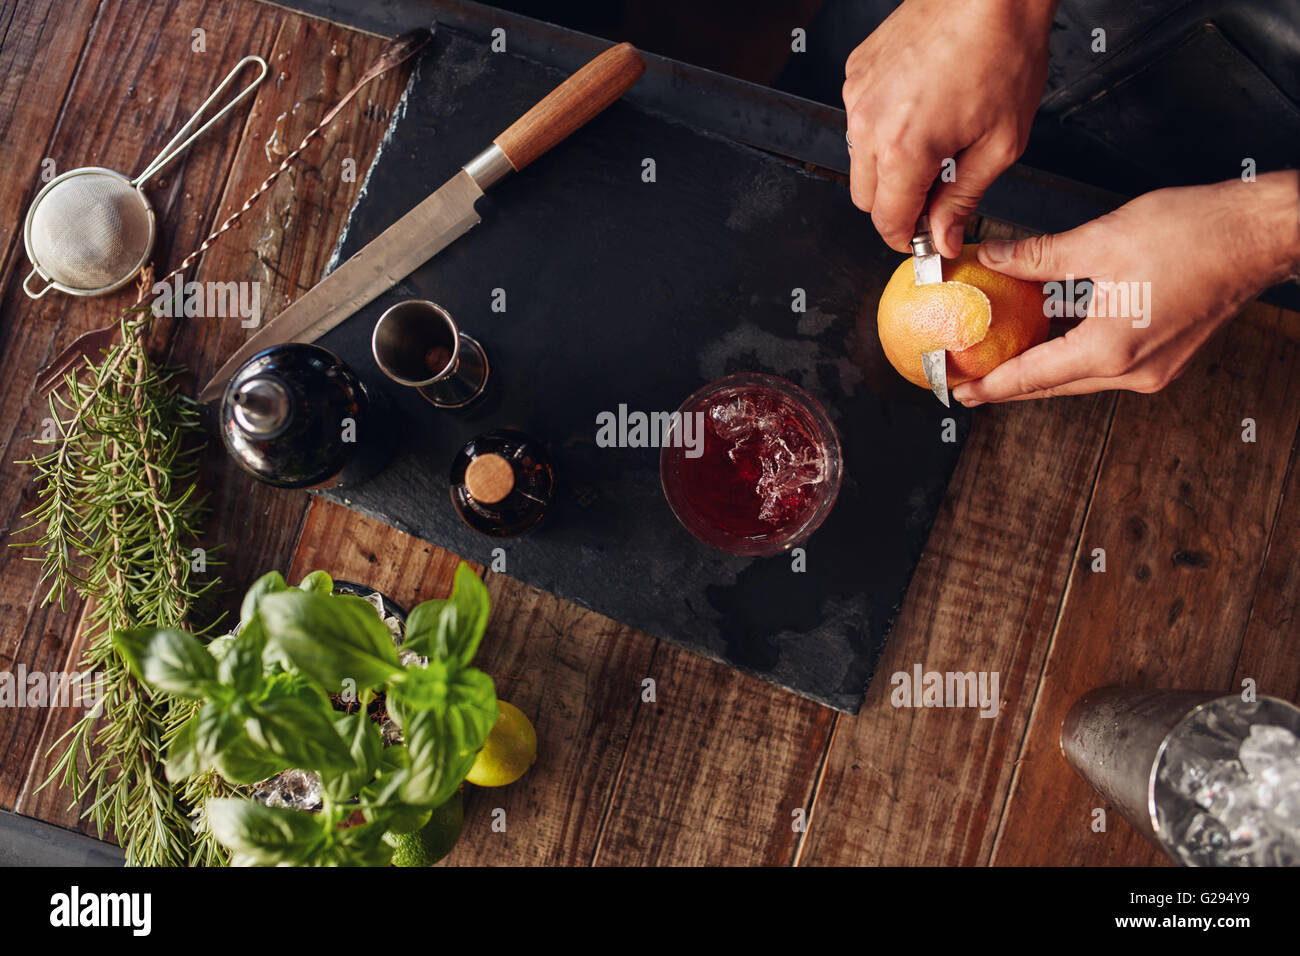 Top view of bartender hands peeling off a grapefruit with cocktail glass and ingredients on table. Garnishing grapefruit cocktai Stock Photo